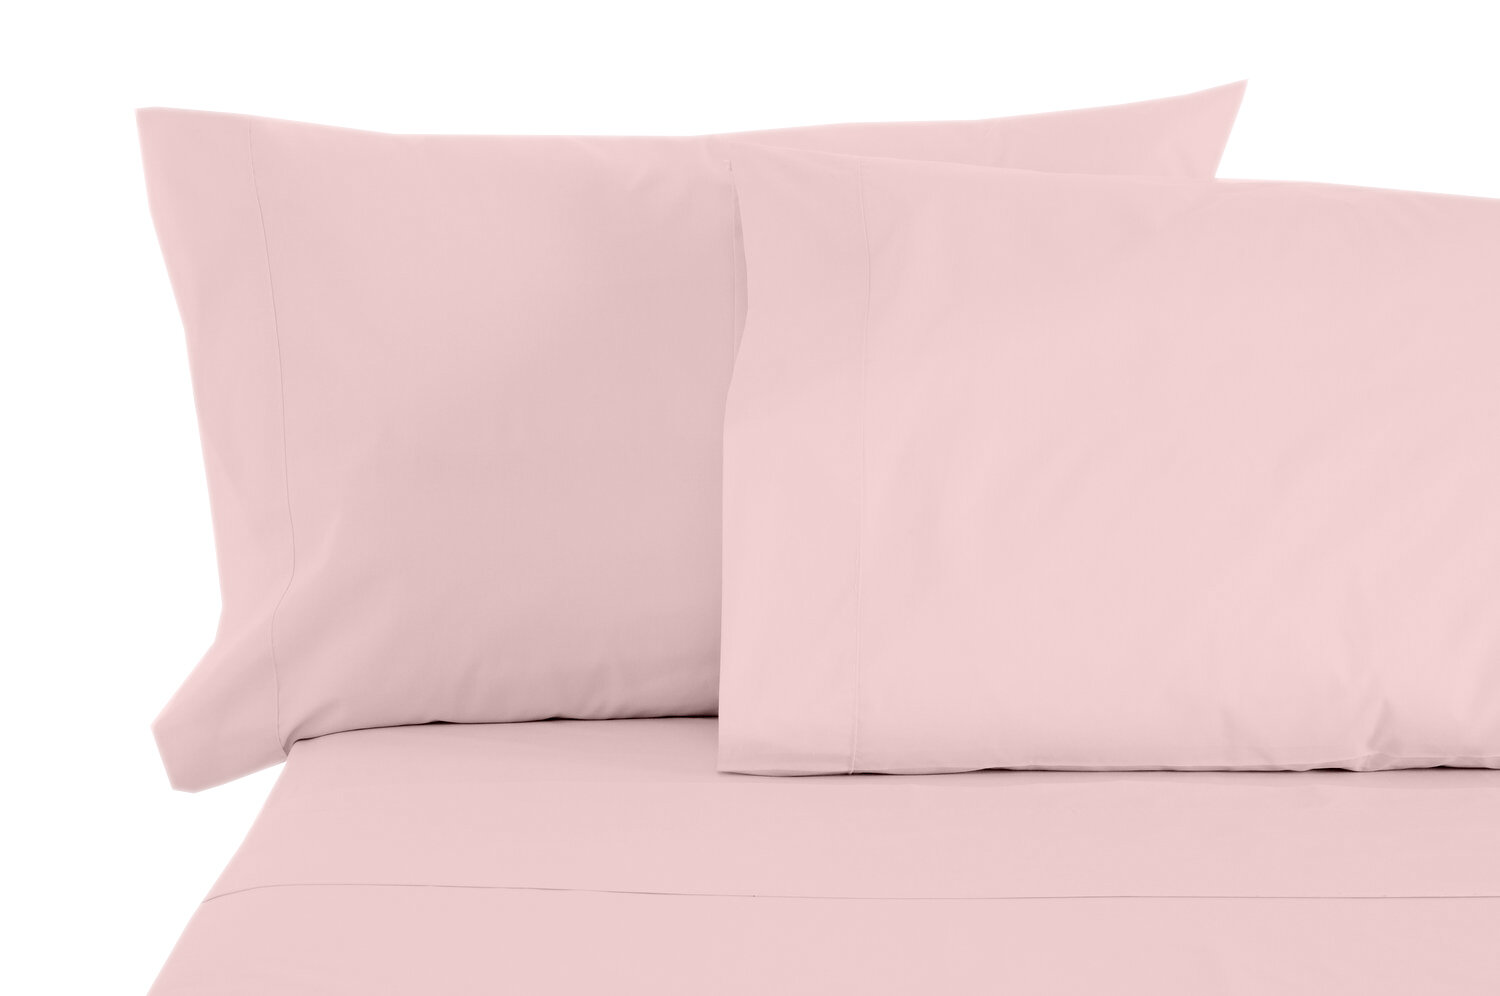 Reversible Cooling/Bamboo Rayon Memory Foam Pillow — Fundraising with  Simply Sheets